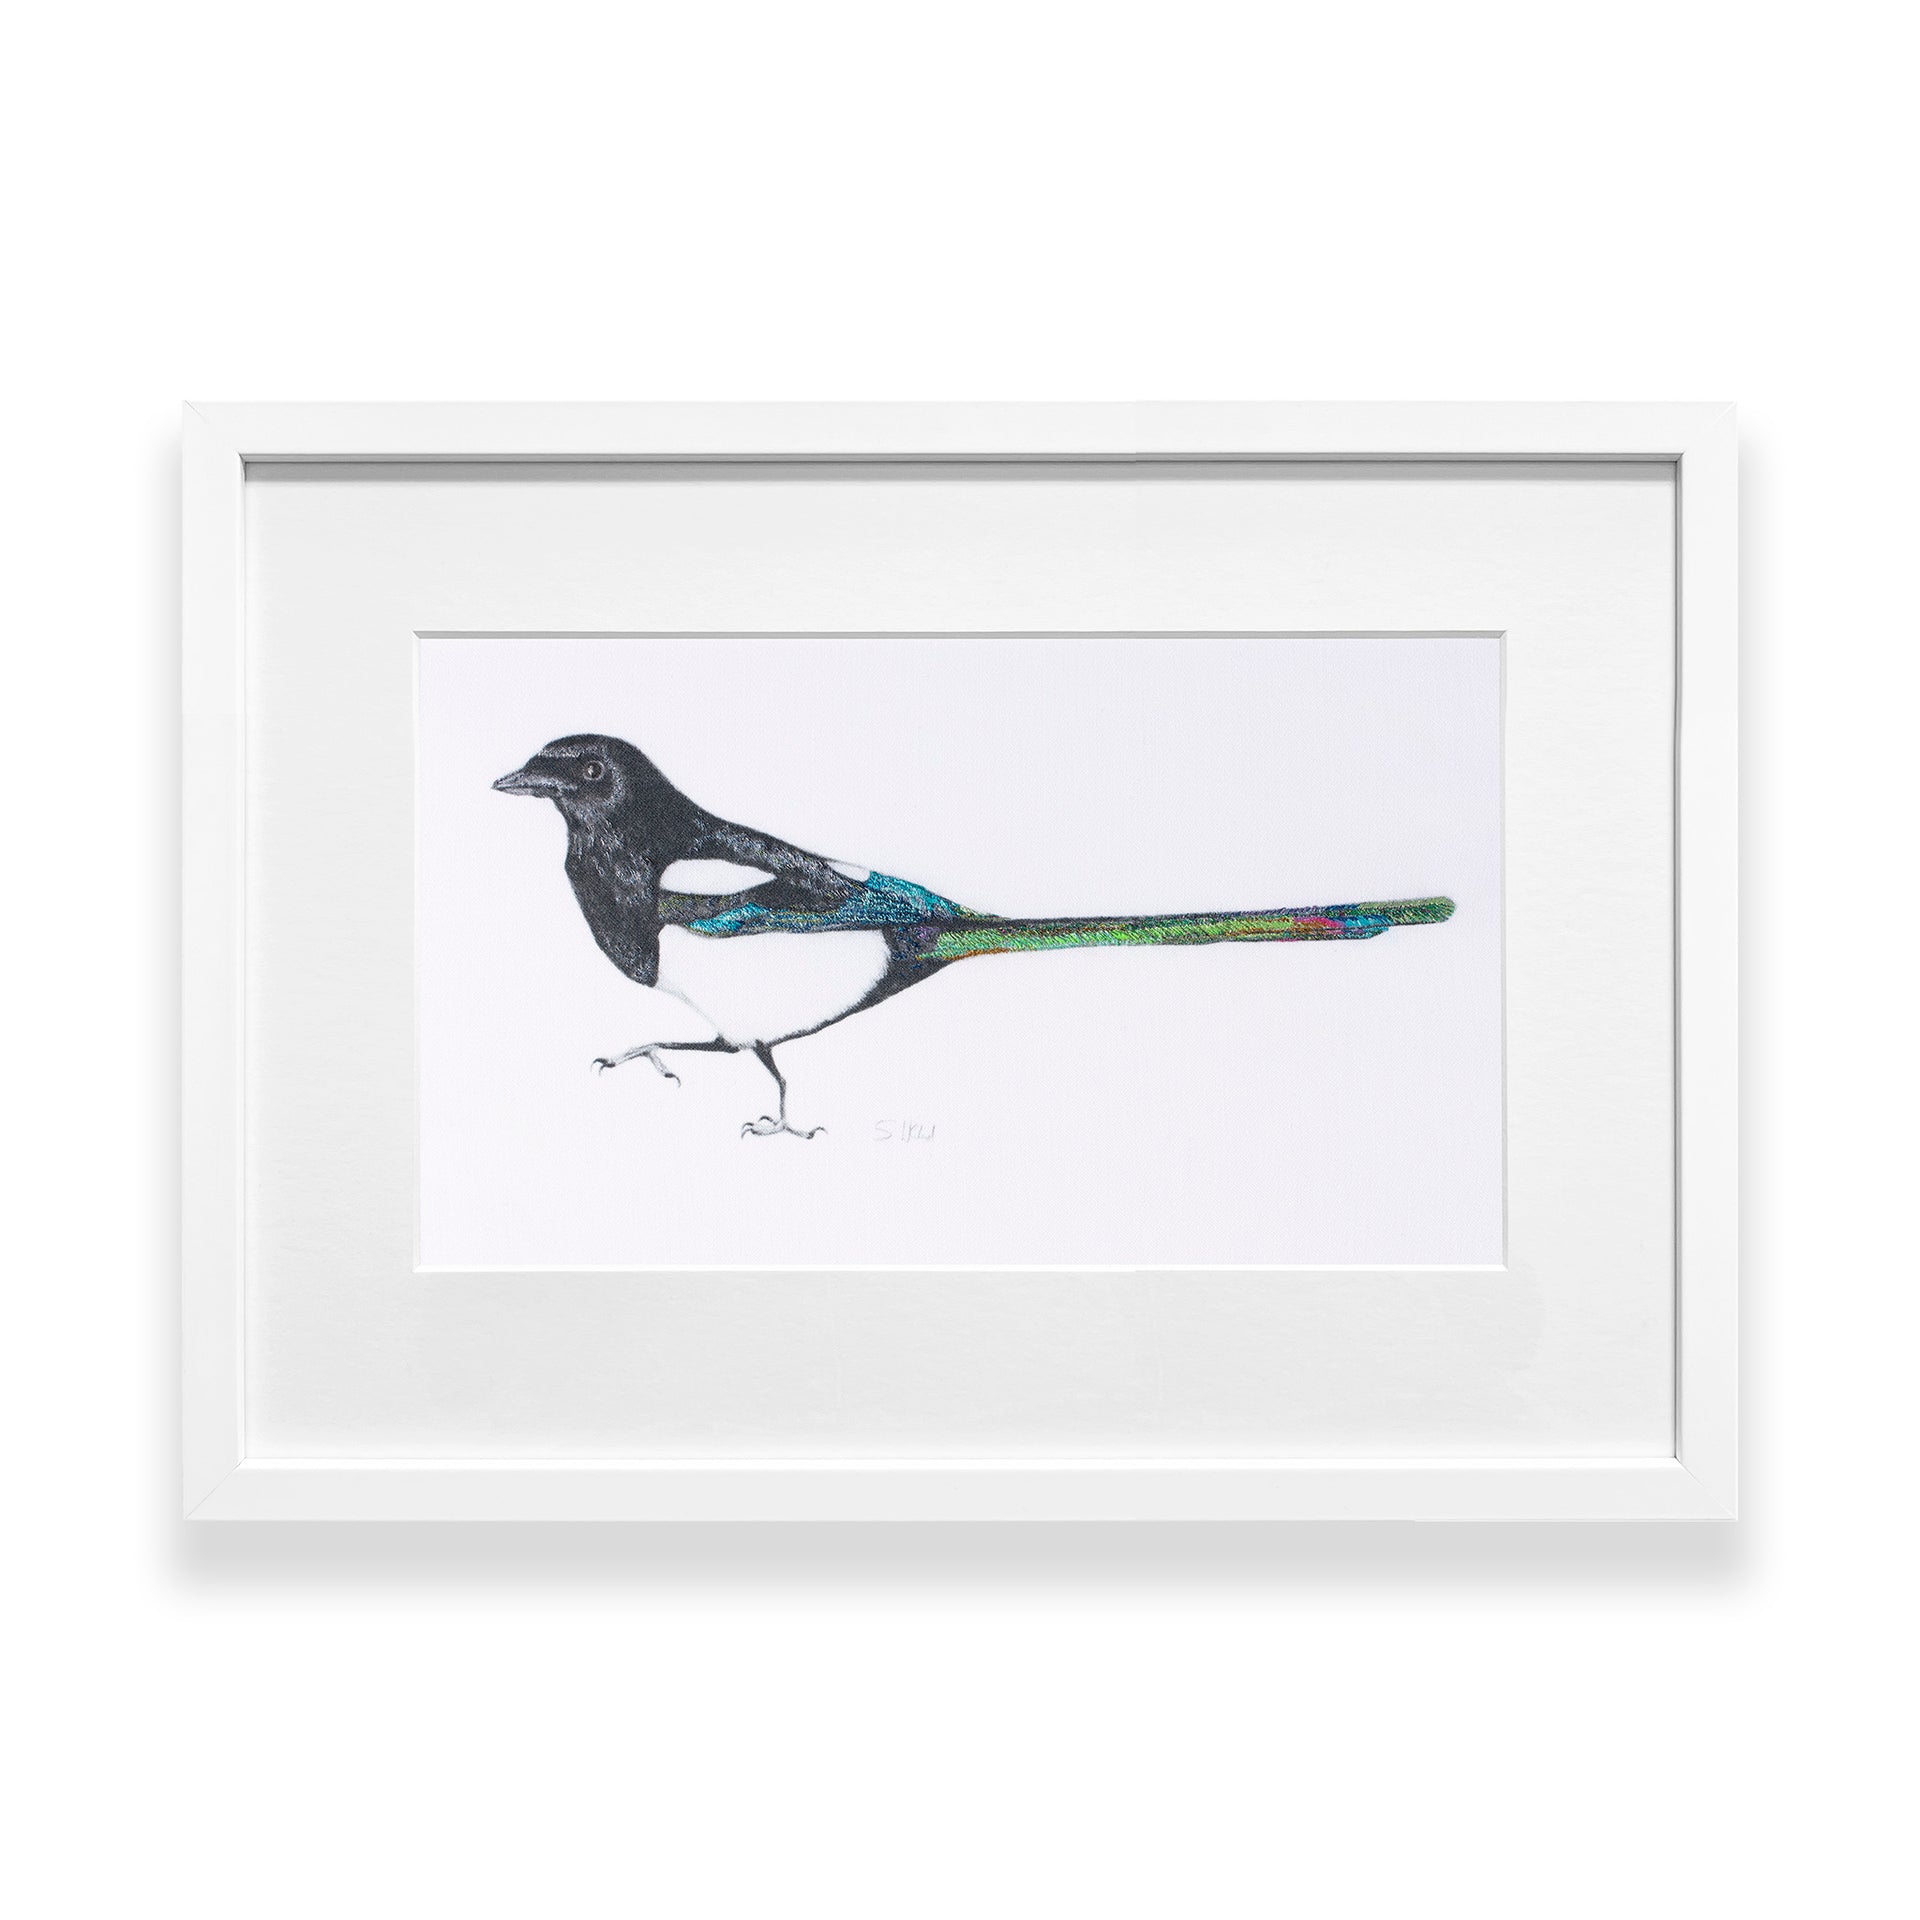 Hand embroidered Magpie original artwork in white frame